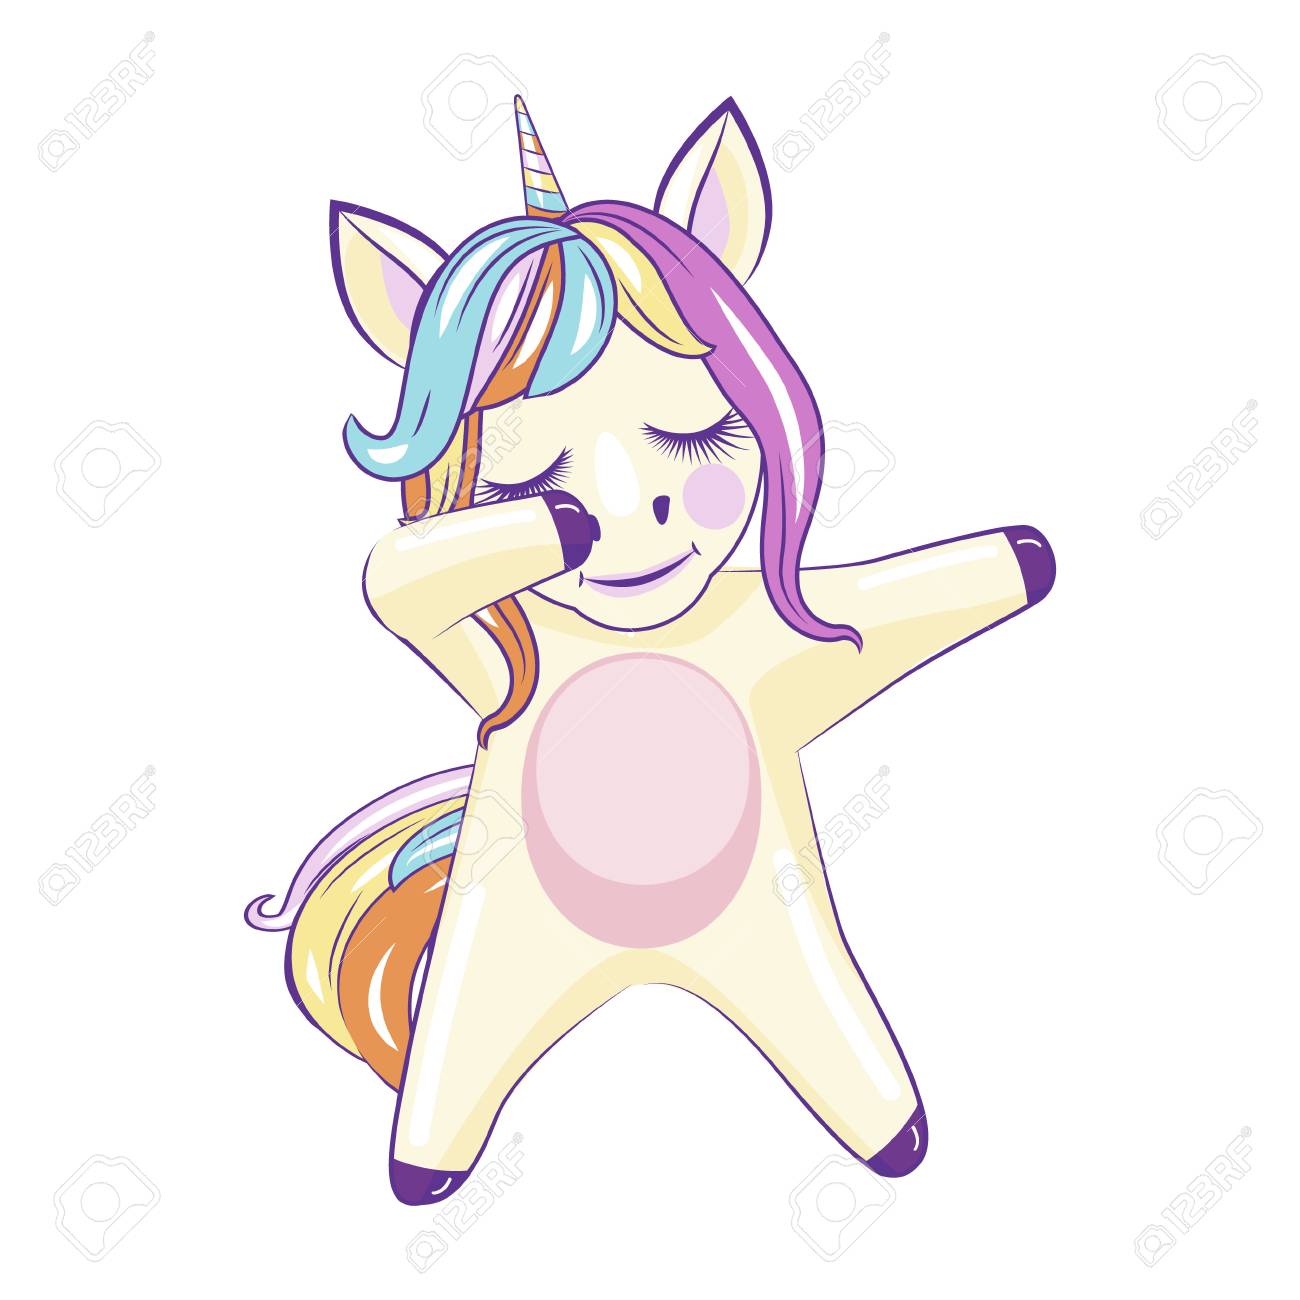 Dabbing CUTE Unicorn On WHITE Background Royalty Free Cliparts